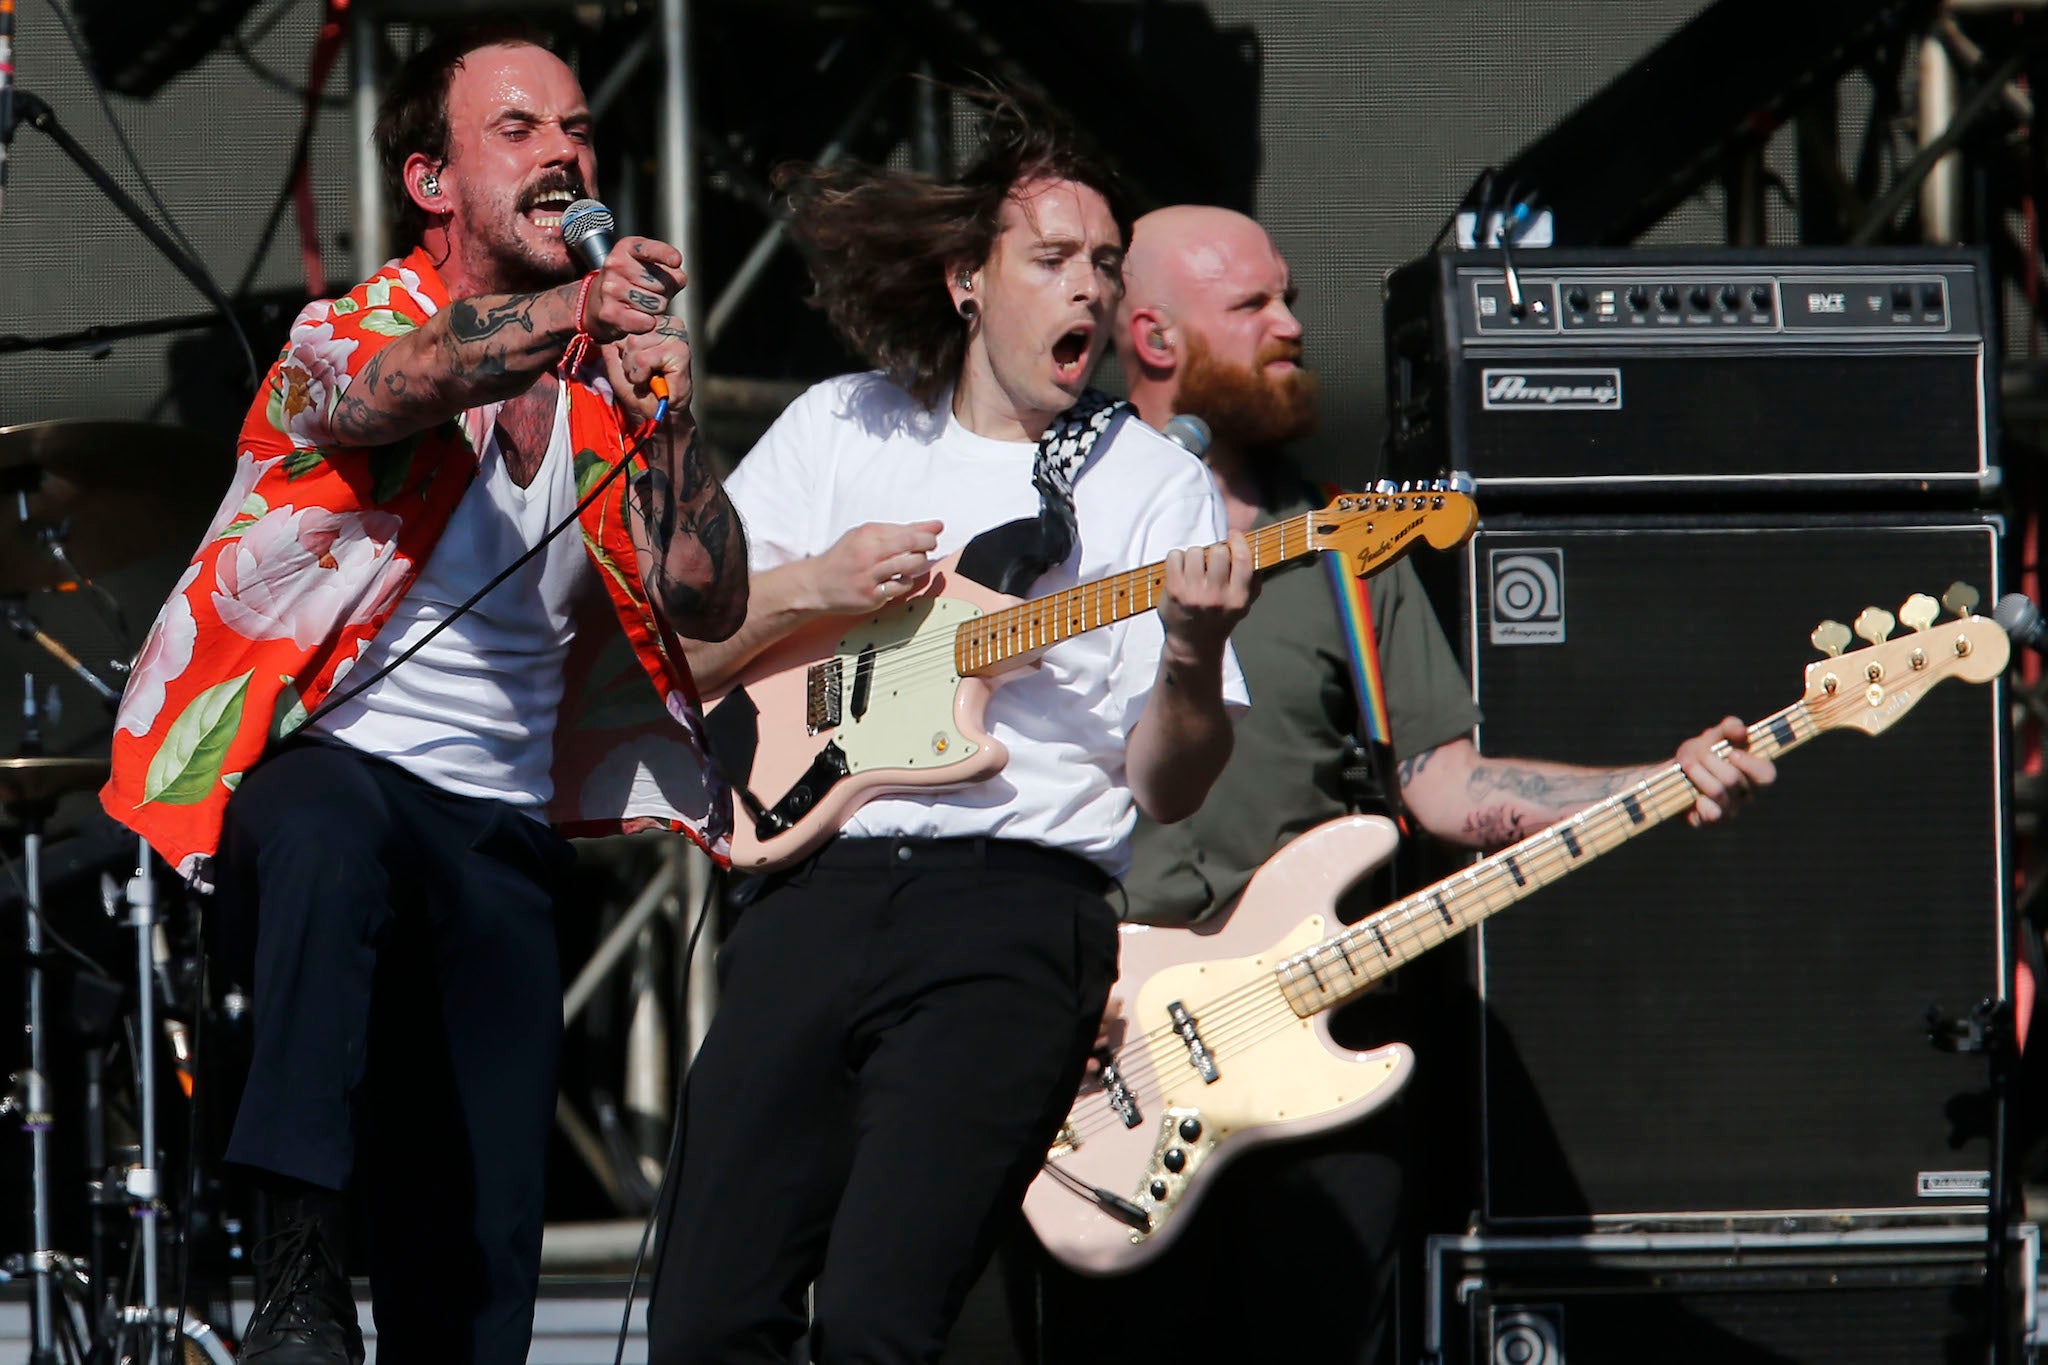 Talbot, Kiernan and Devonshire of Idles perform during day one of Lollapalooza Chile 2022